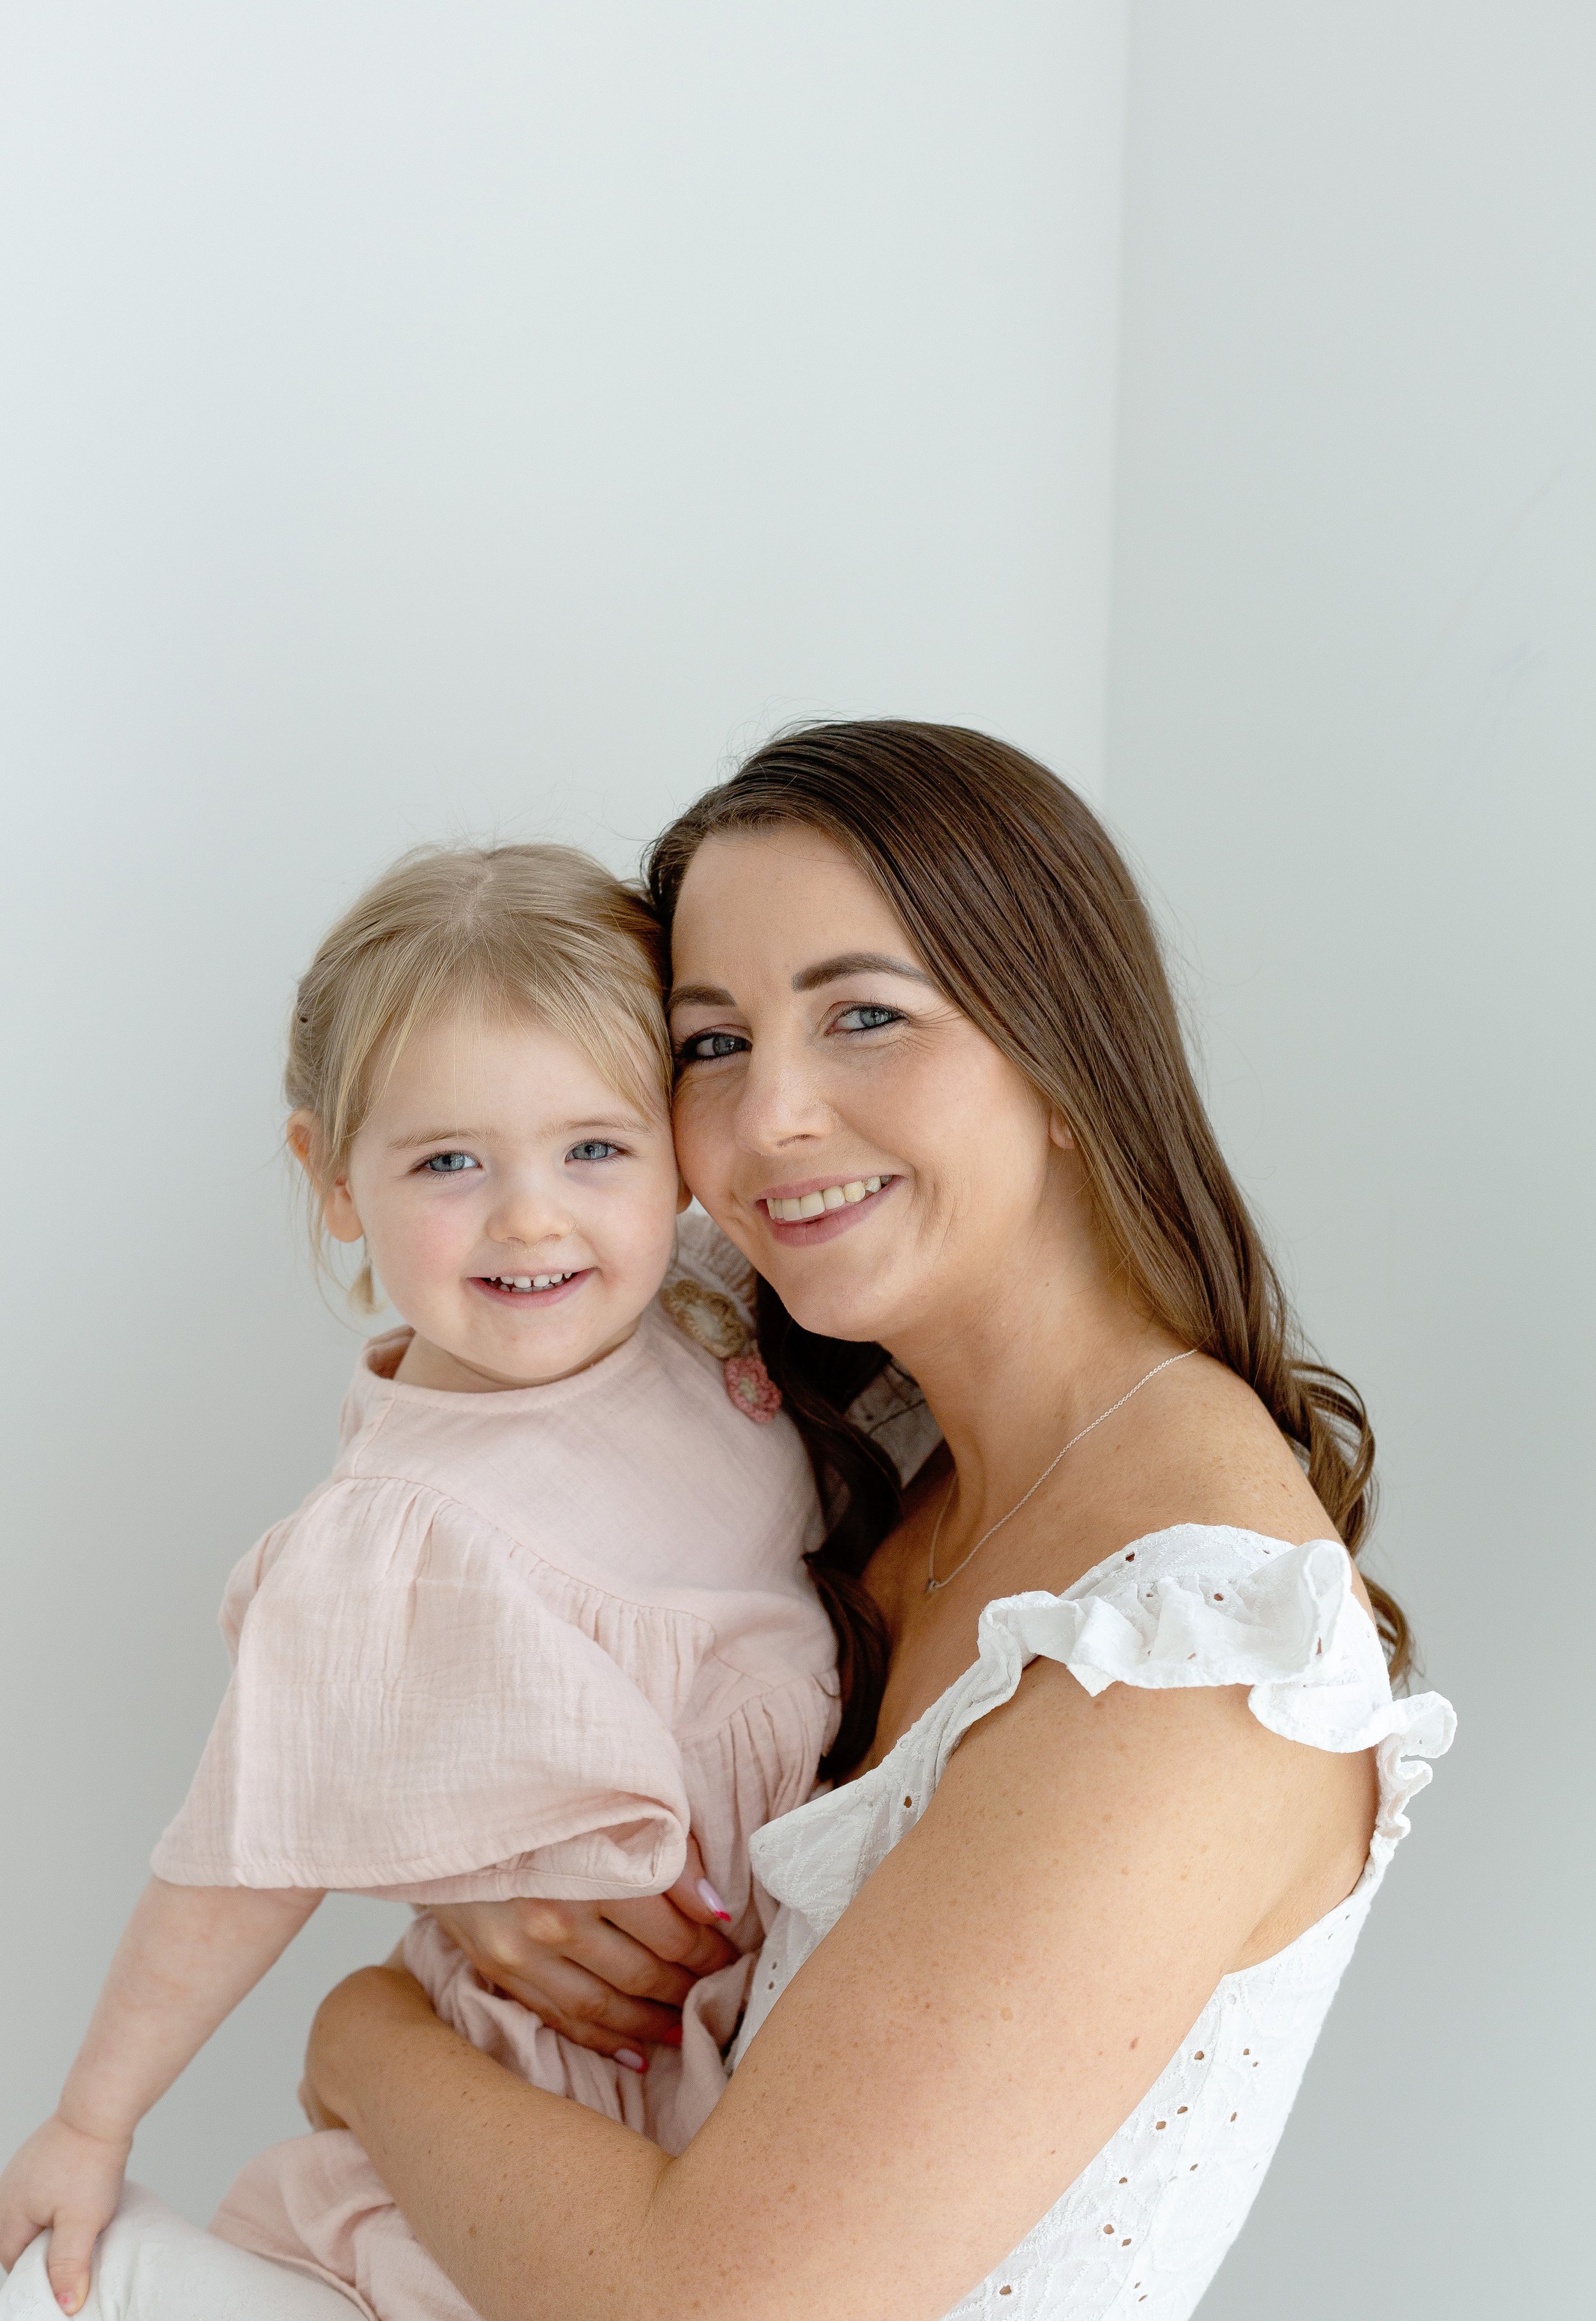 Mothers-Day-photography-session-hertfordshireEvie-Grace-PhotographyEvie-Grace-PhotographyIMG_0756.jpg